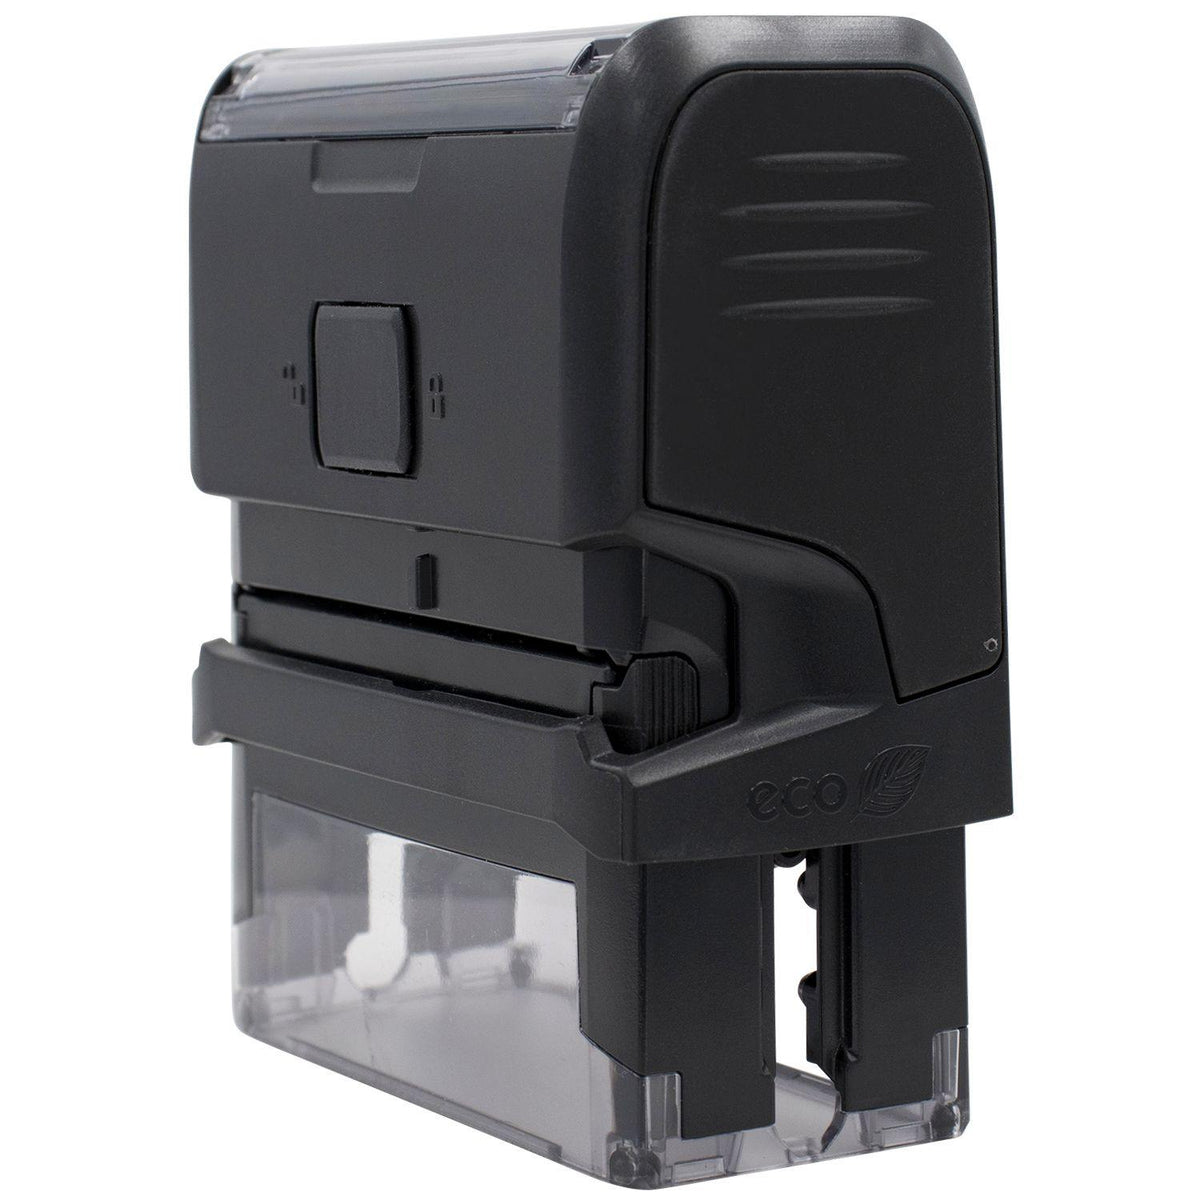 Large Self-Inking Stay Safe Stay Healthy Stamp - Engineer Seal Stamps - Brand_Trodat, Impression Size_Large, Stamp Type_Self-Inking Stamp, Type of Use_Medical Office